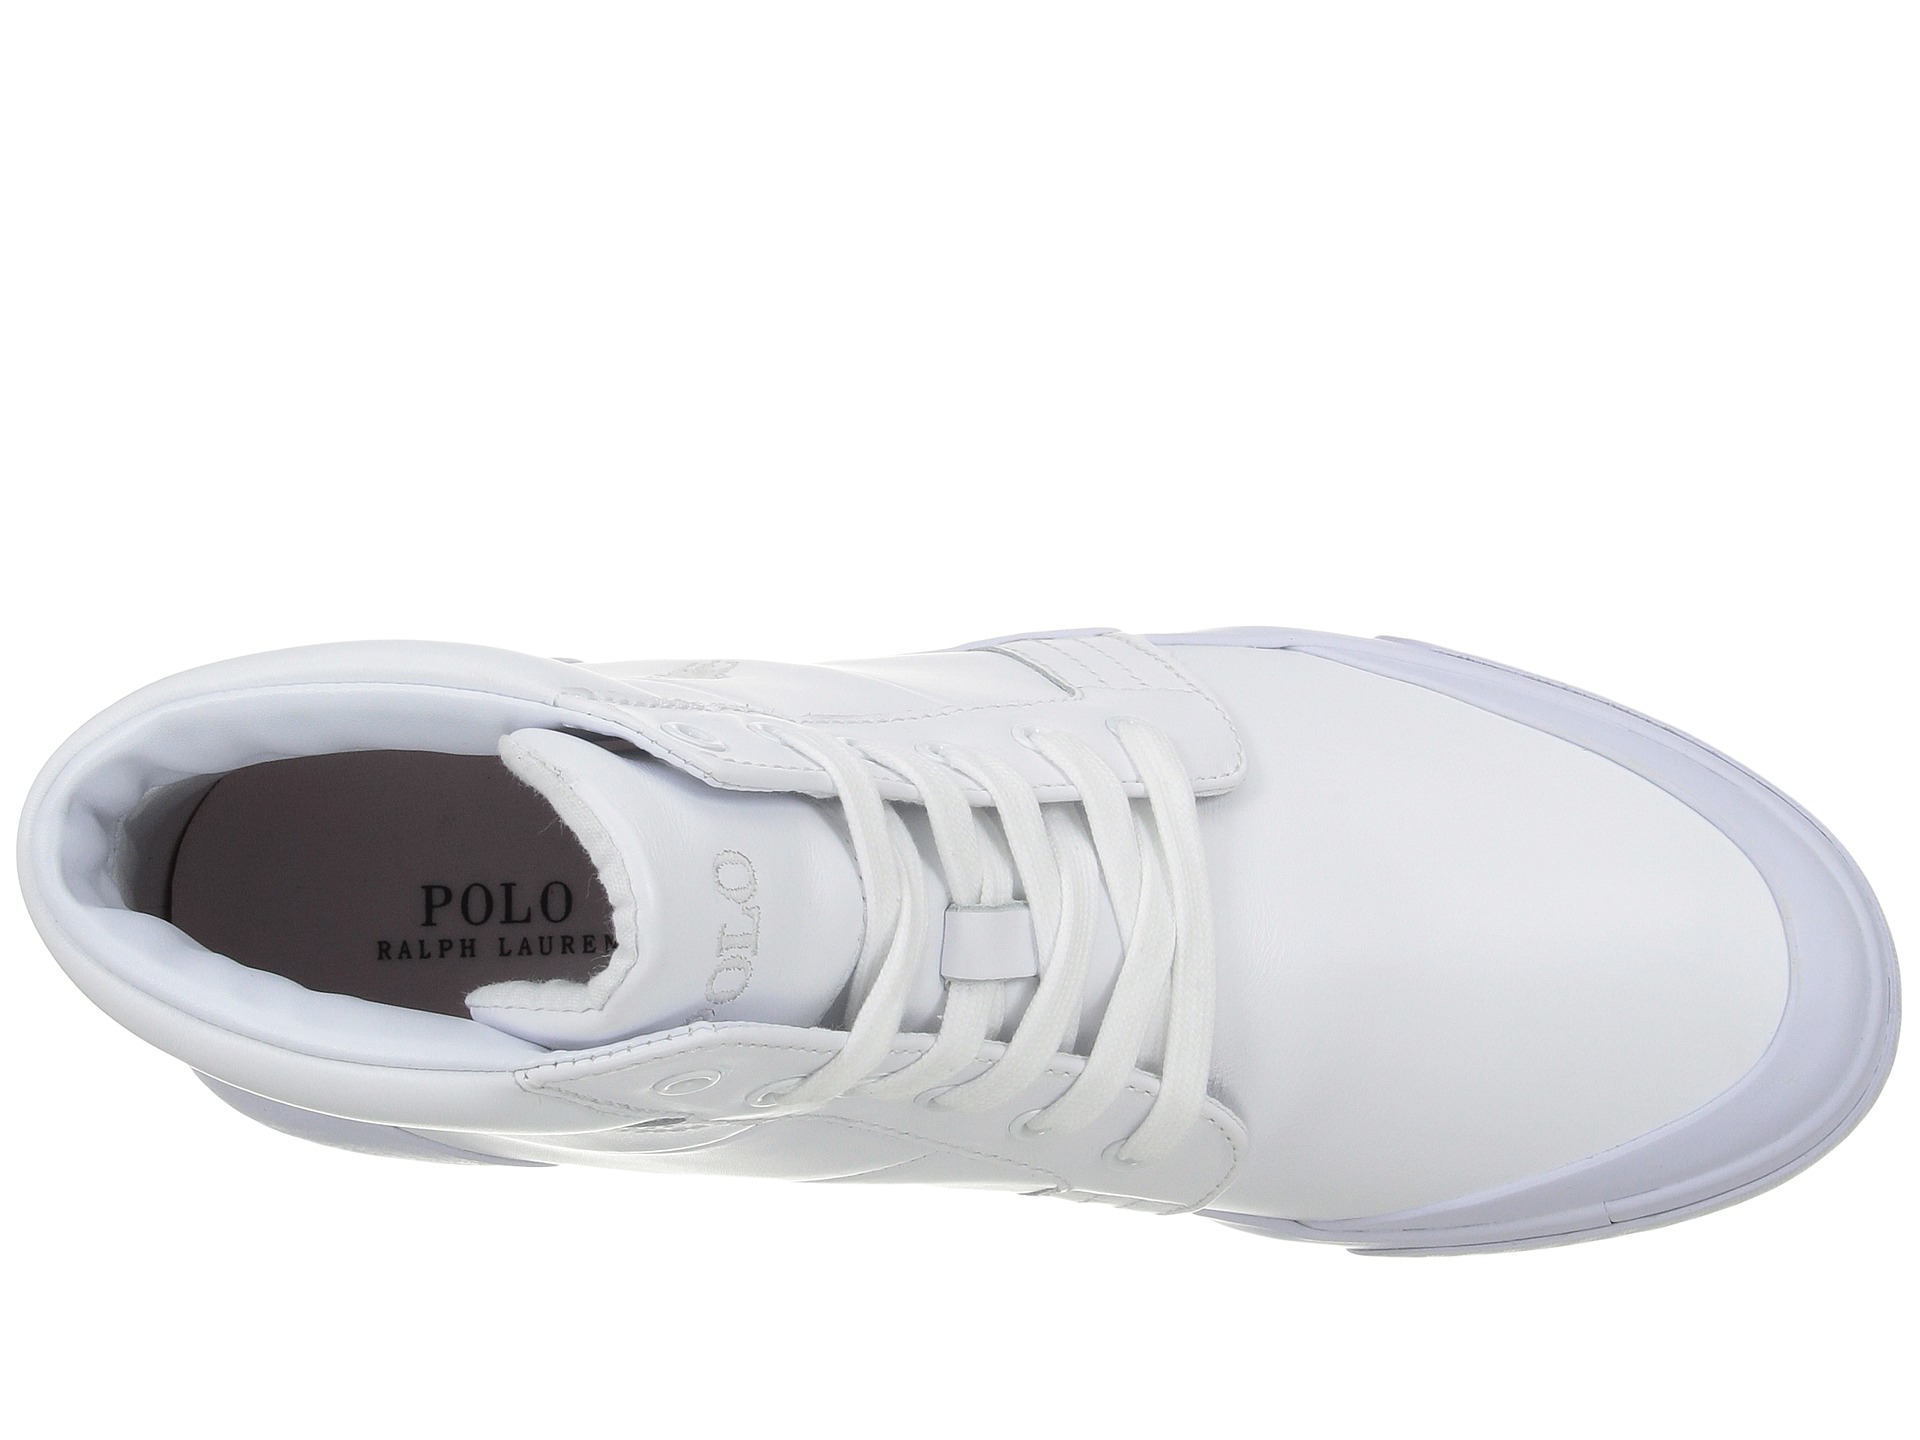 Polo Ralph Lauren Isaak White Smooth Sport Leather - Zappos.com Free ...